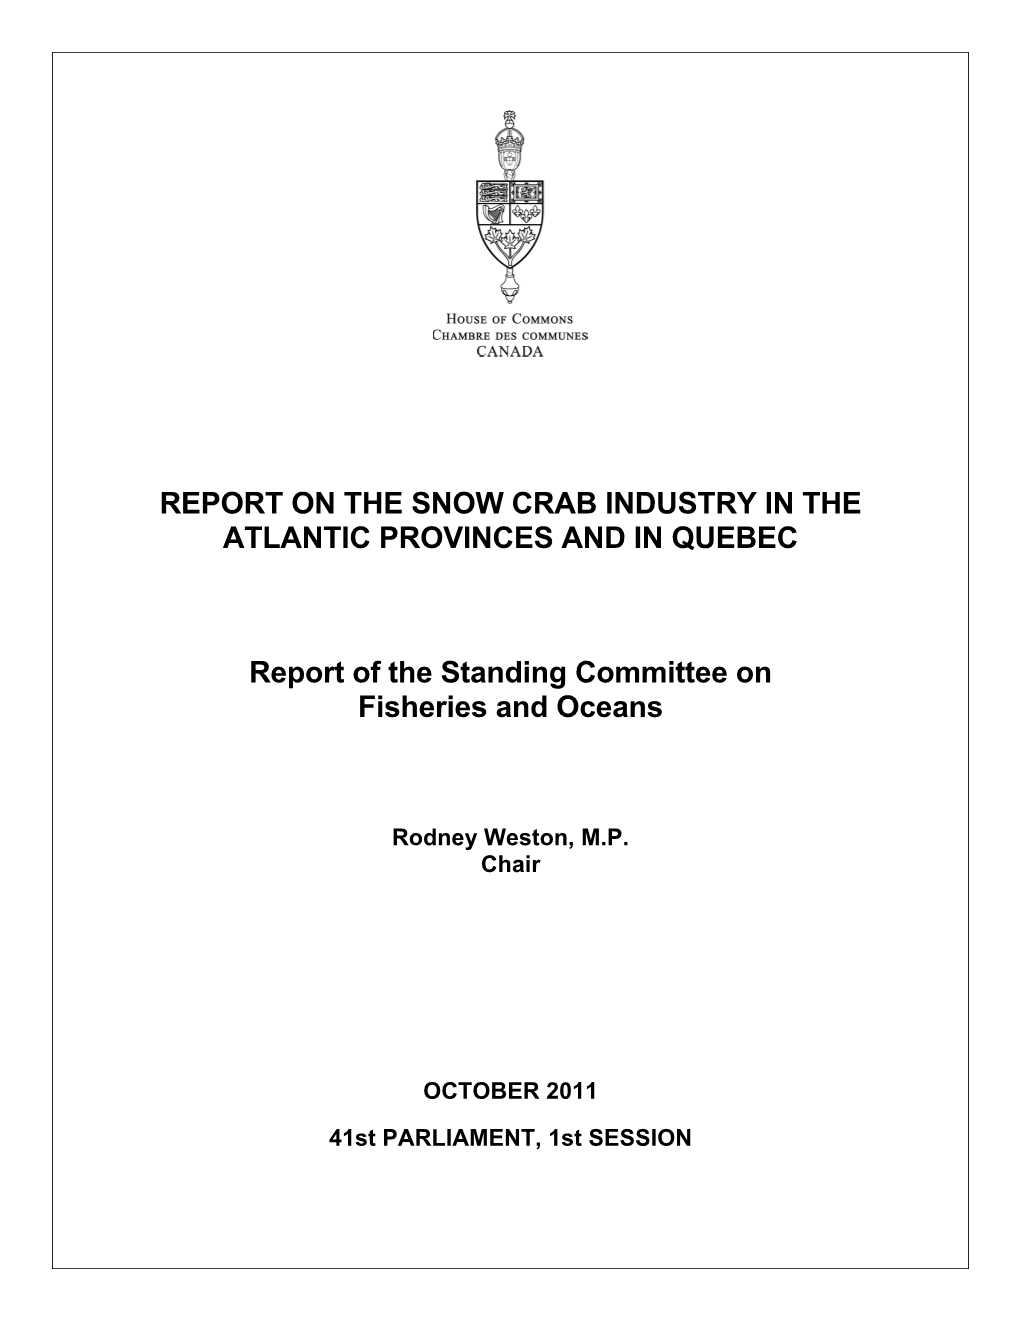 Report on the Snow Crab Industry in The